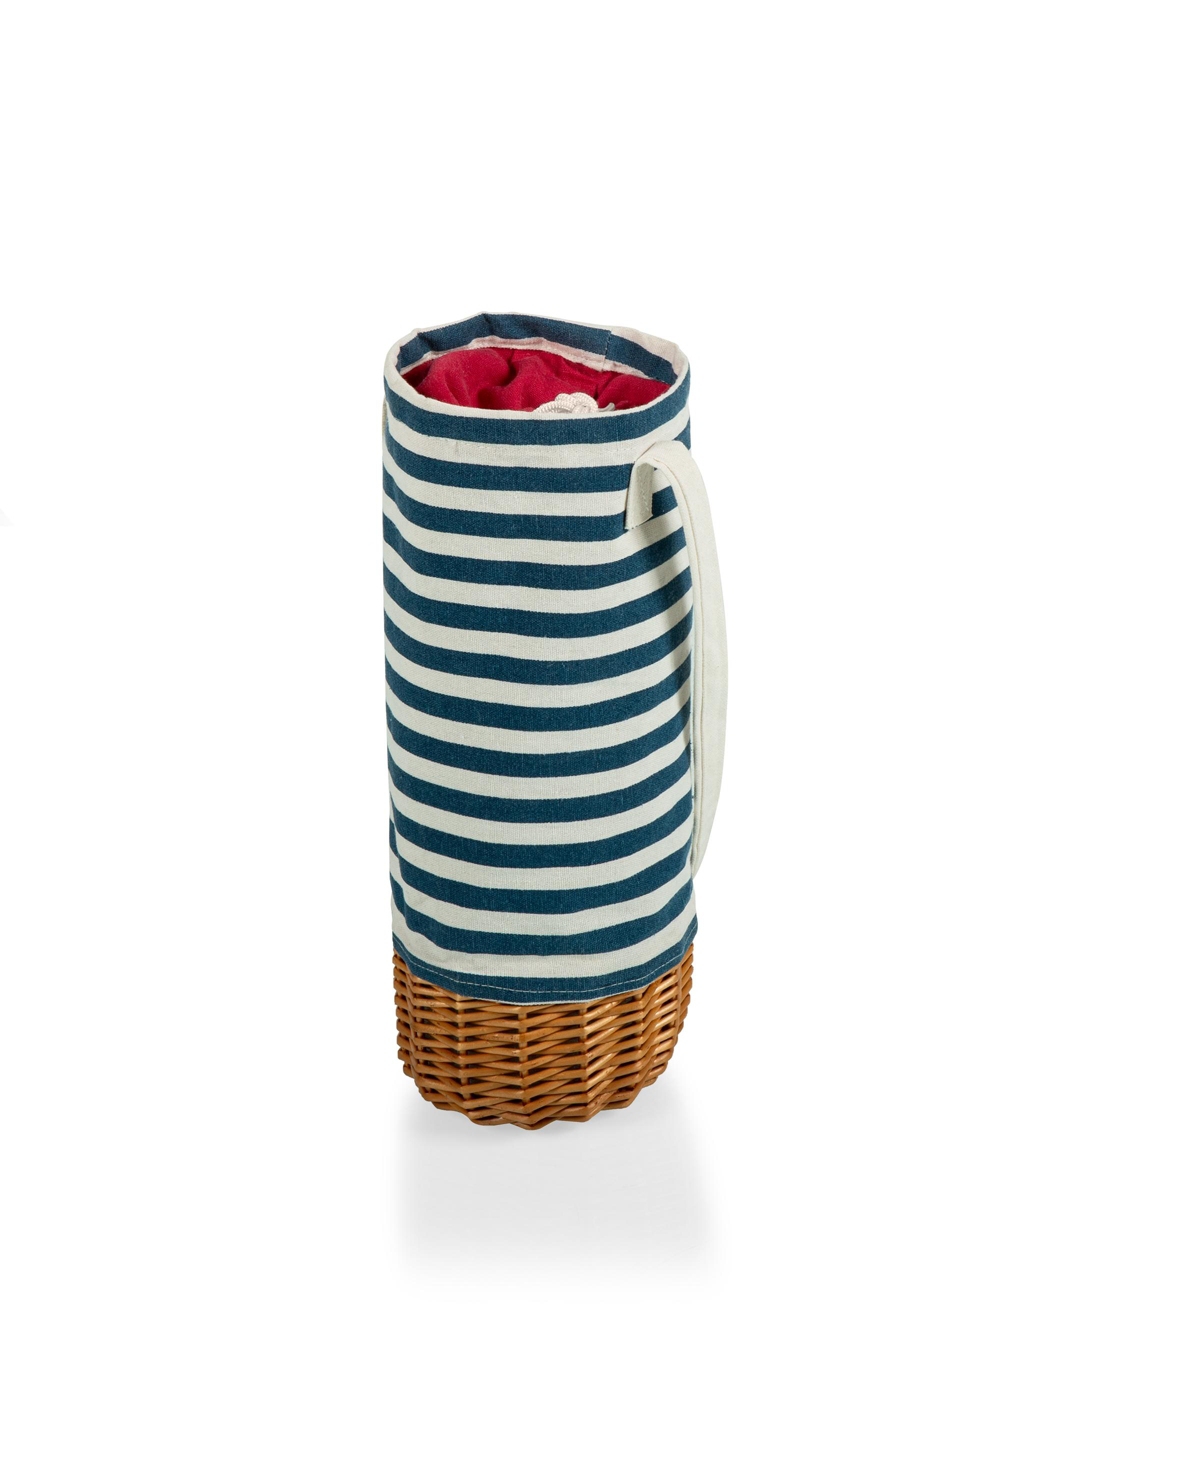 Malbec Insulated Canvas and Willow Wine Bottle Basket - Navy  White Stripes